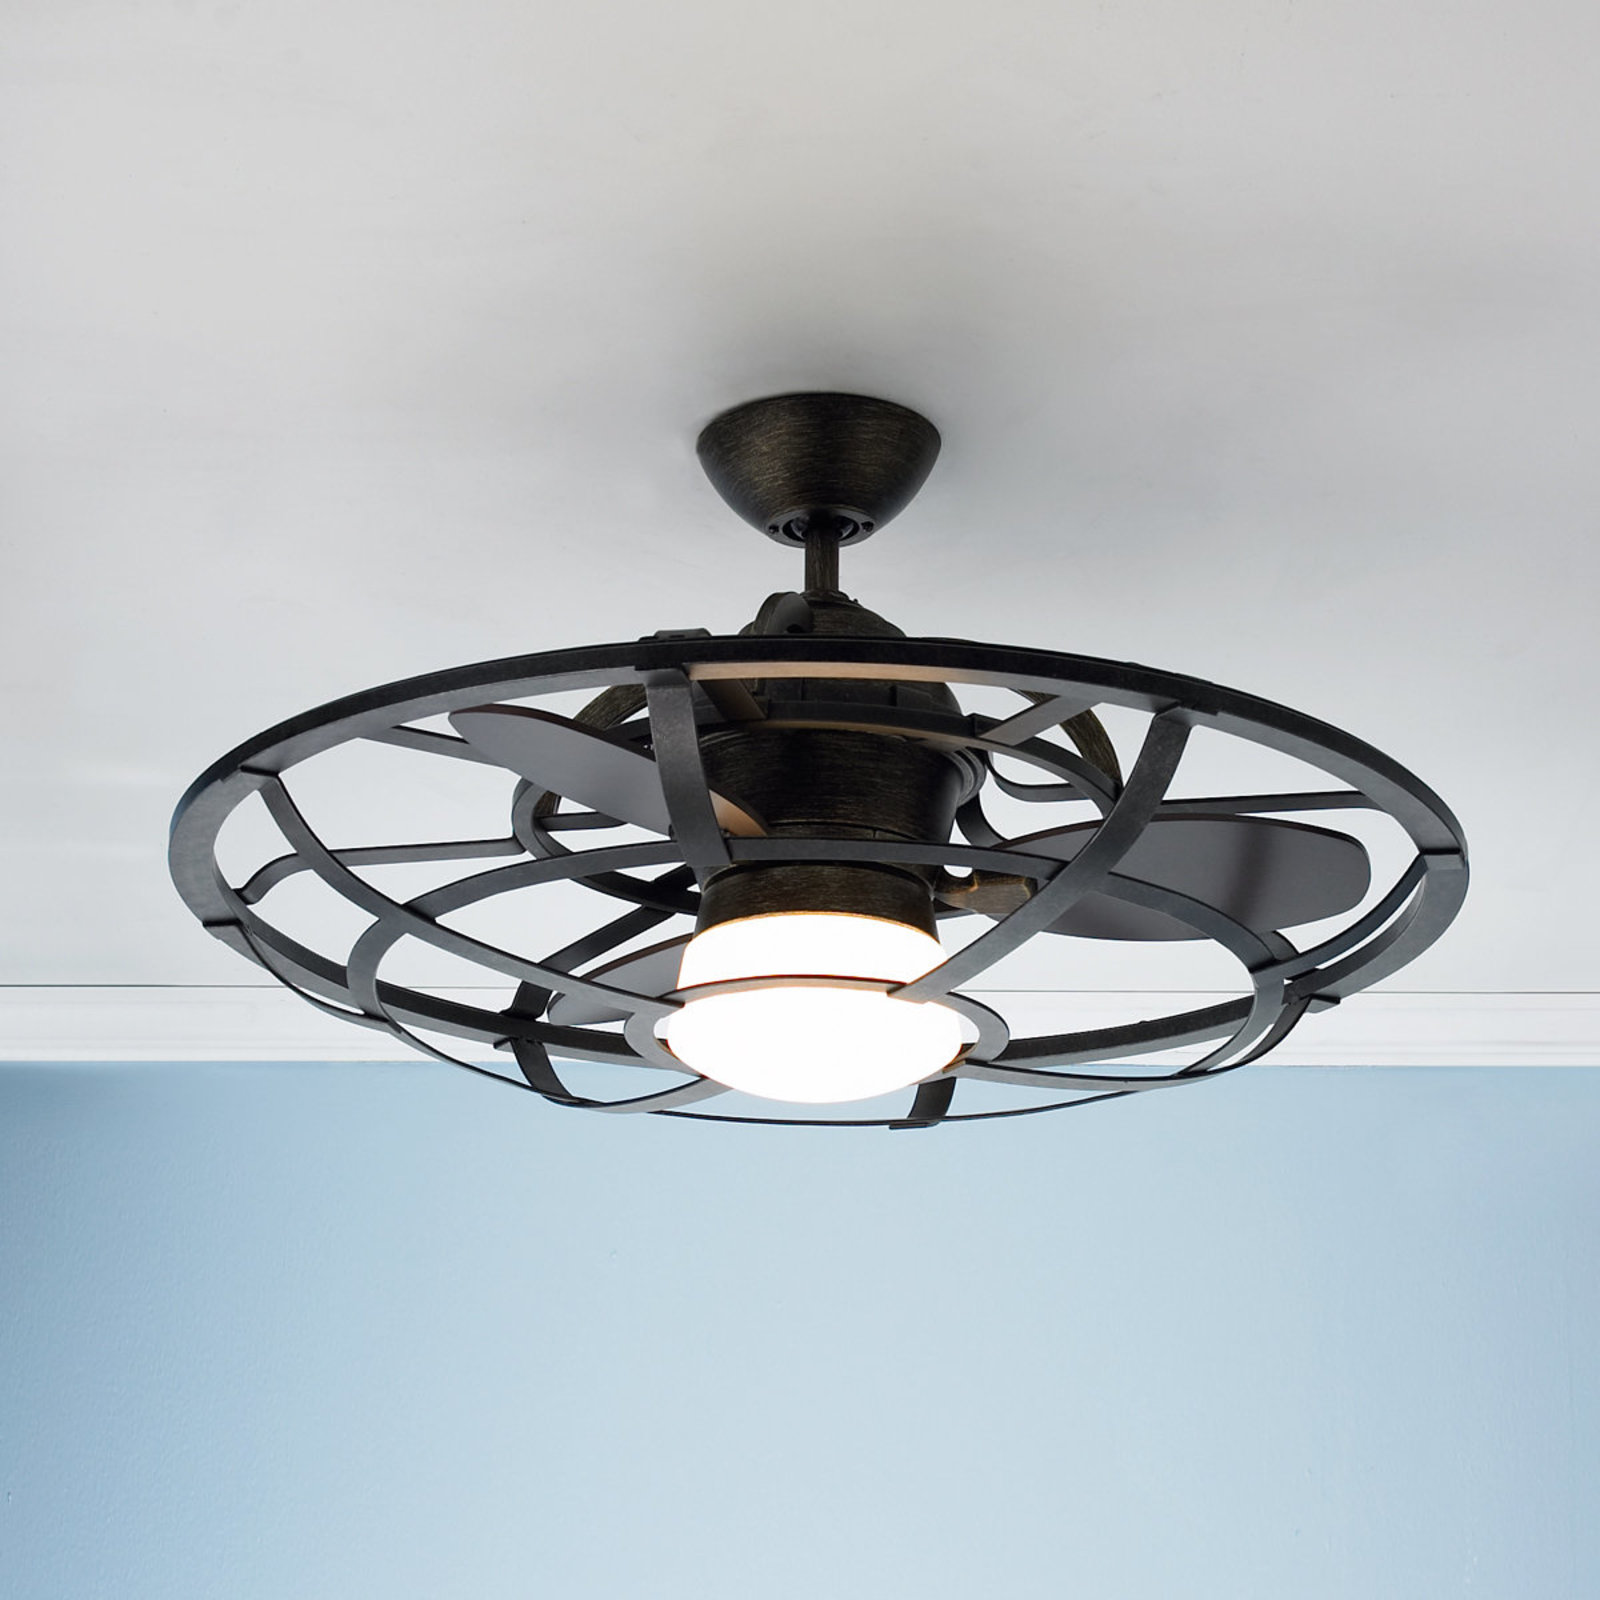 All Ceiling Fans | Explore Our Curated Collection - Shades of Light